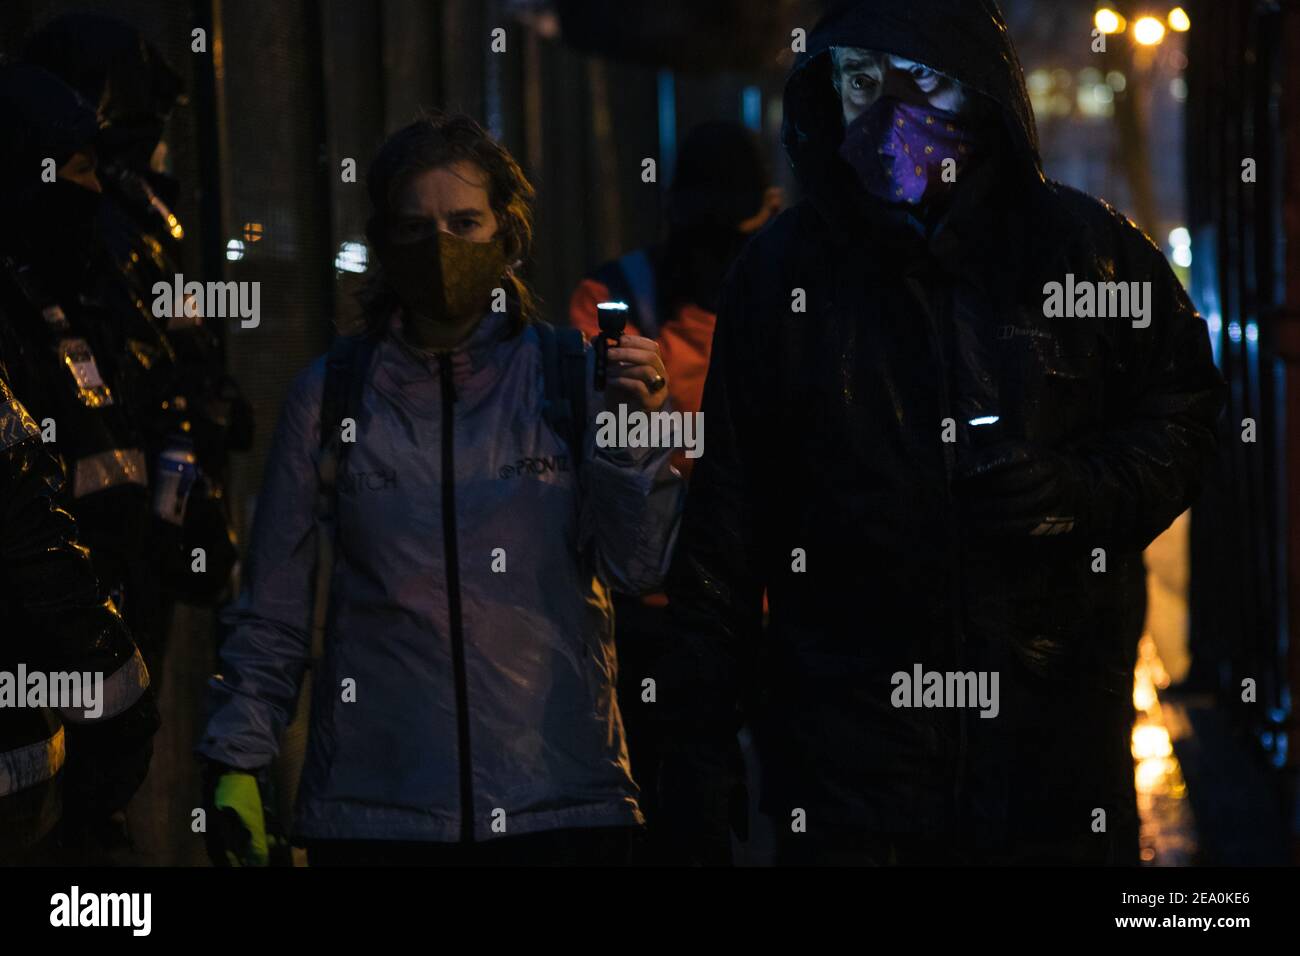 London, UK. 6th February, 2021. Candlelit vigil in remembrence of the lost trees at Euston Square, London as part of the Stop HS2 protest February 6th 2021. Women carry candles as the NET working for HS2 look on Credit: Denise Laura Baker/Alamy Live News Stock Photo